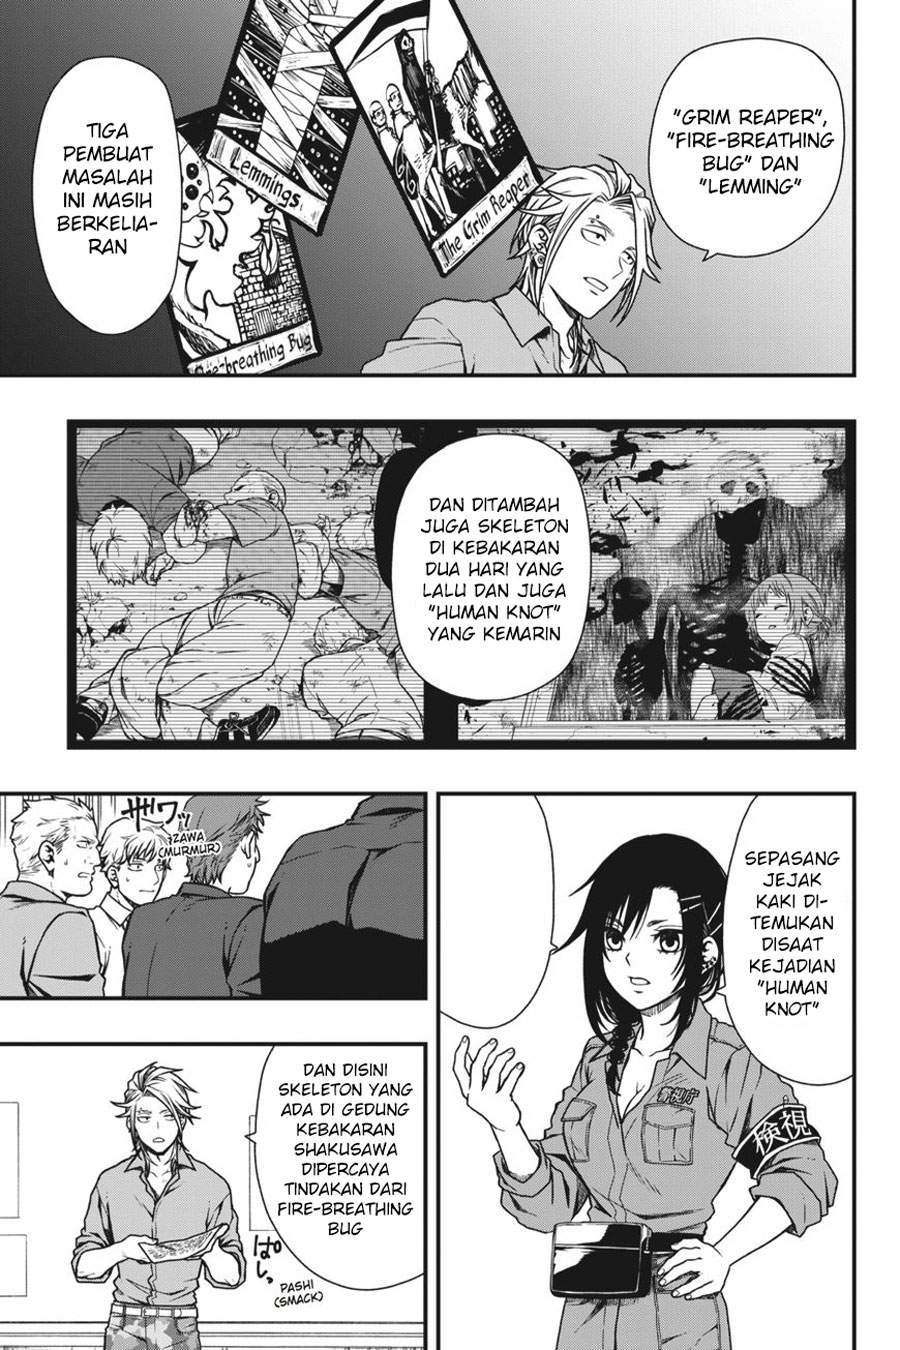 Dead Mount Death Play Chapter 06 Bahasa Indonesia